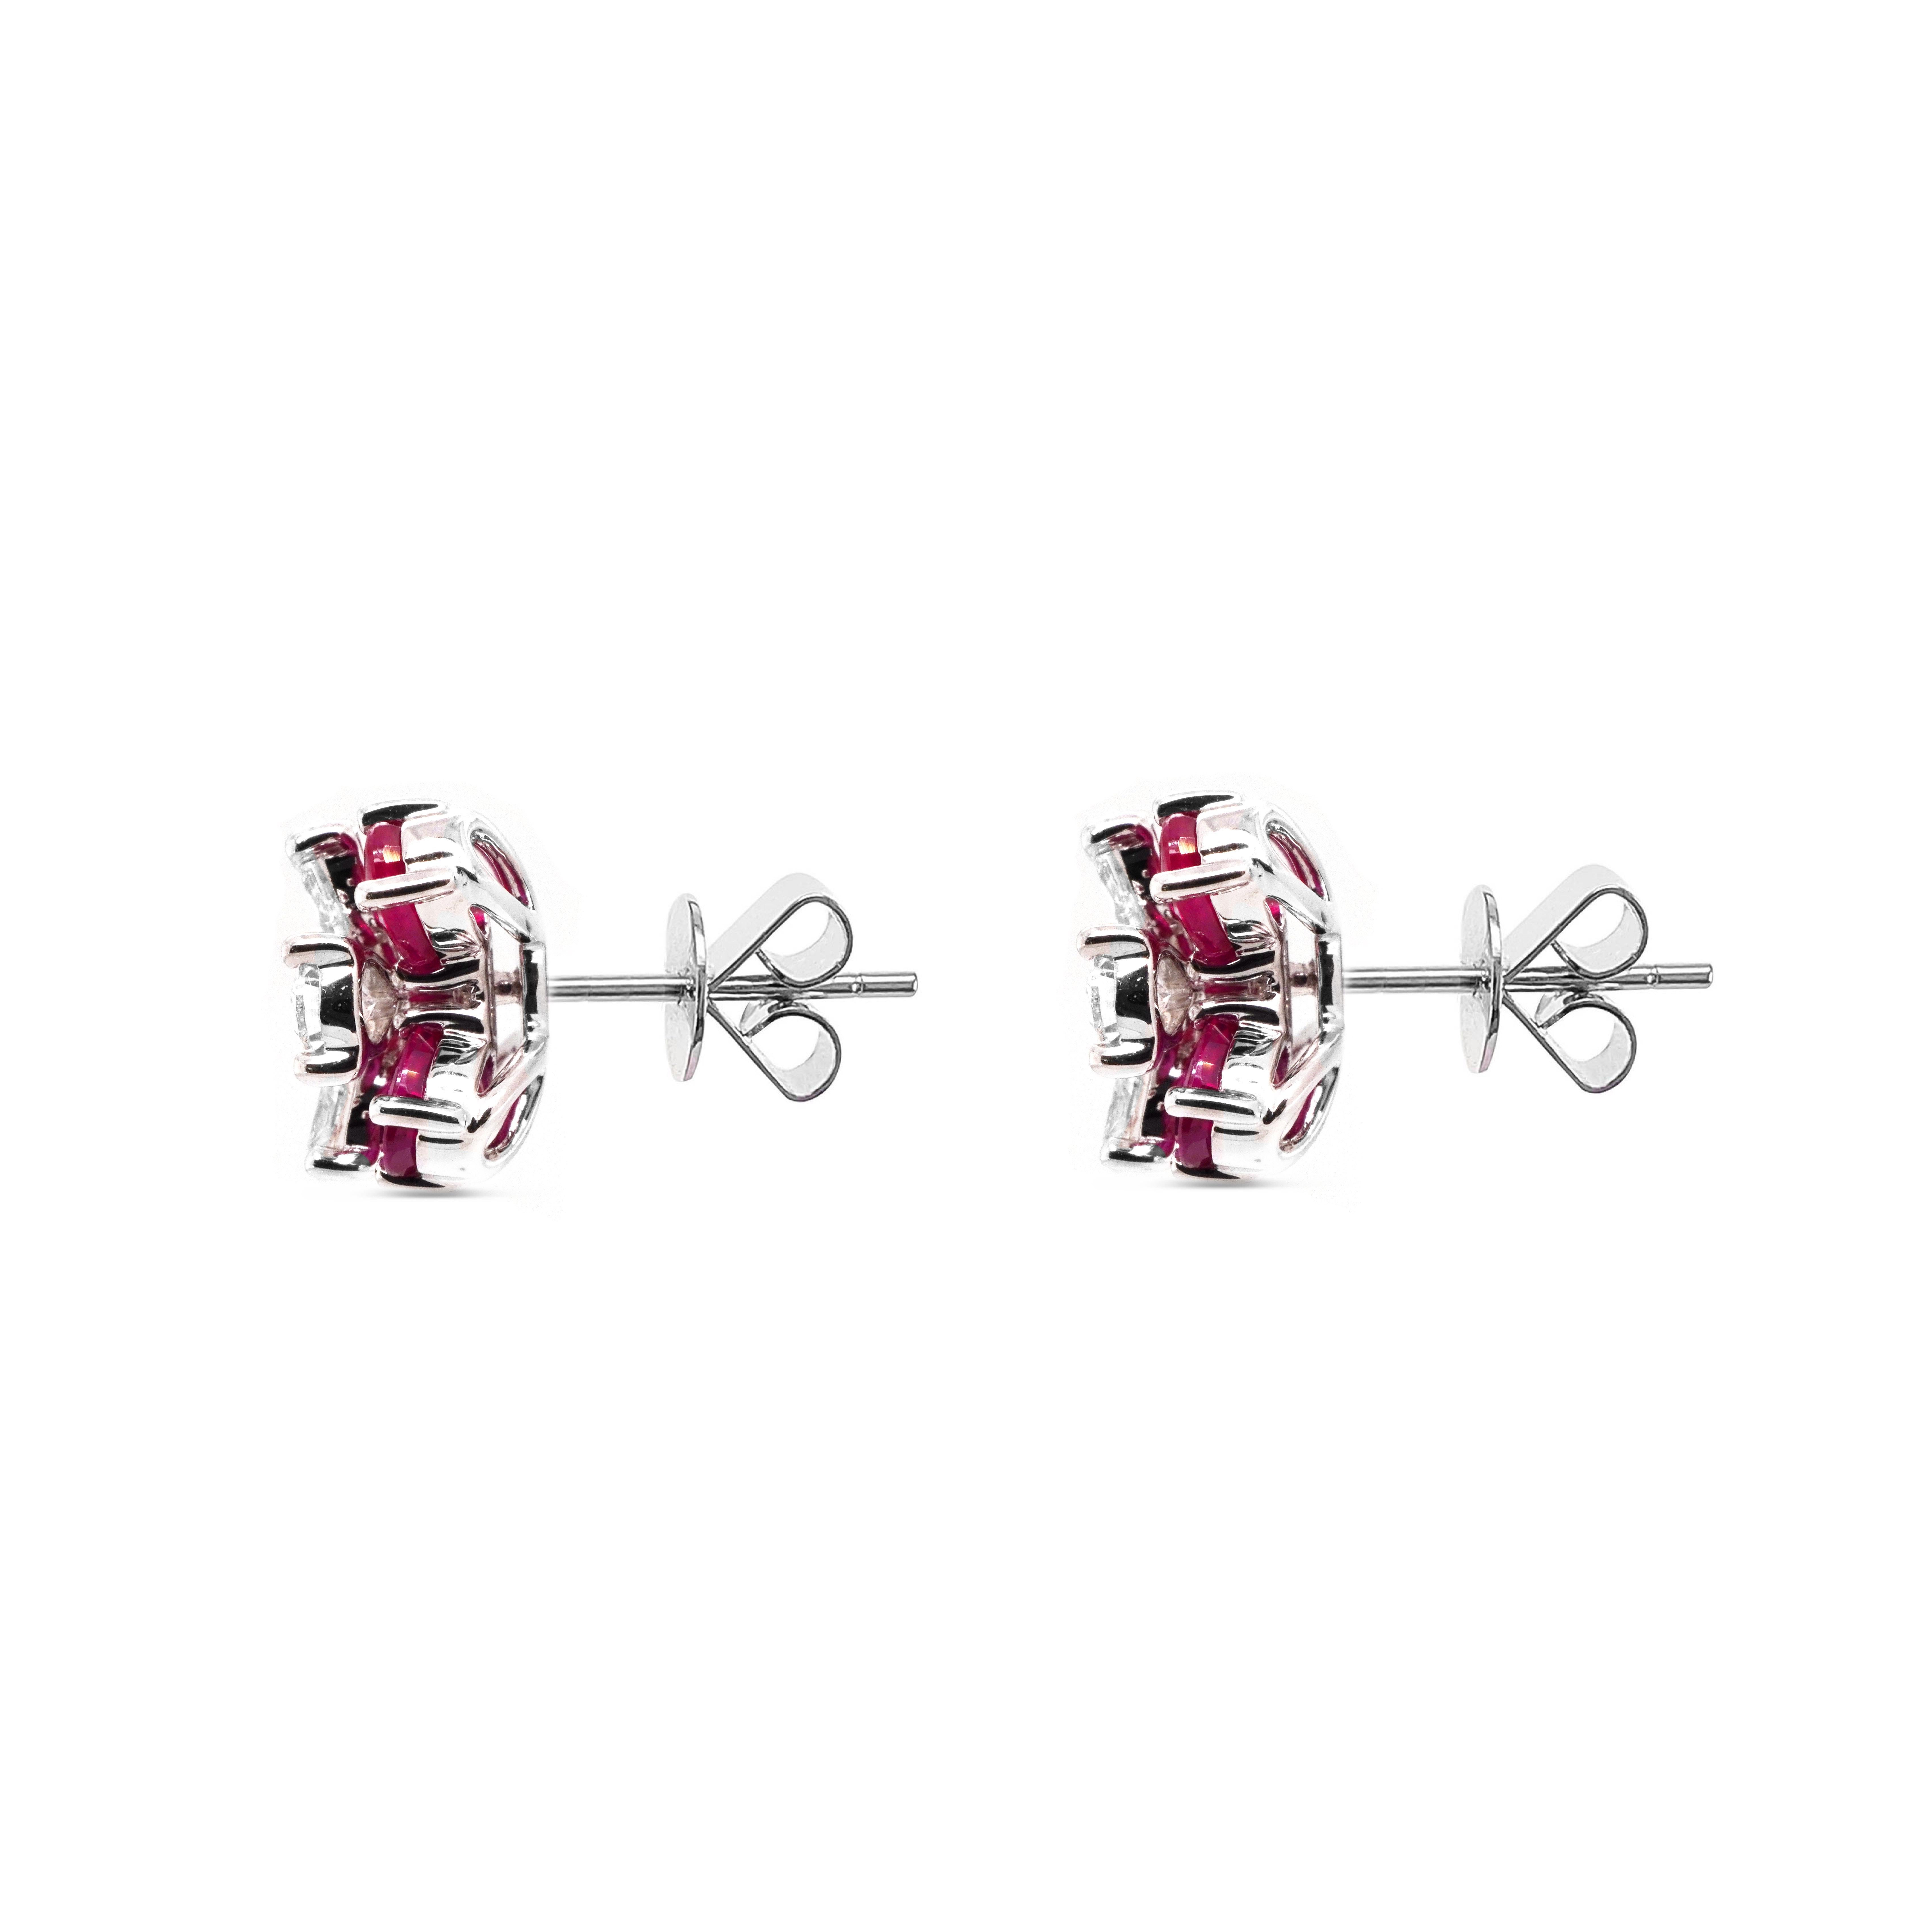 A smart yet classical combination of 2.09 carats of vivid red ruby and 1.07 carats of white brilliant diamond are set together in this pretty earring.
The details of the earring are mentioned below:
Color: F
Clarity: Vs
